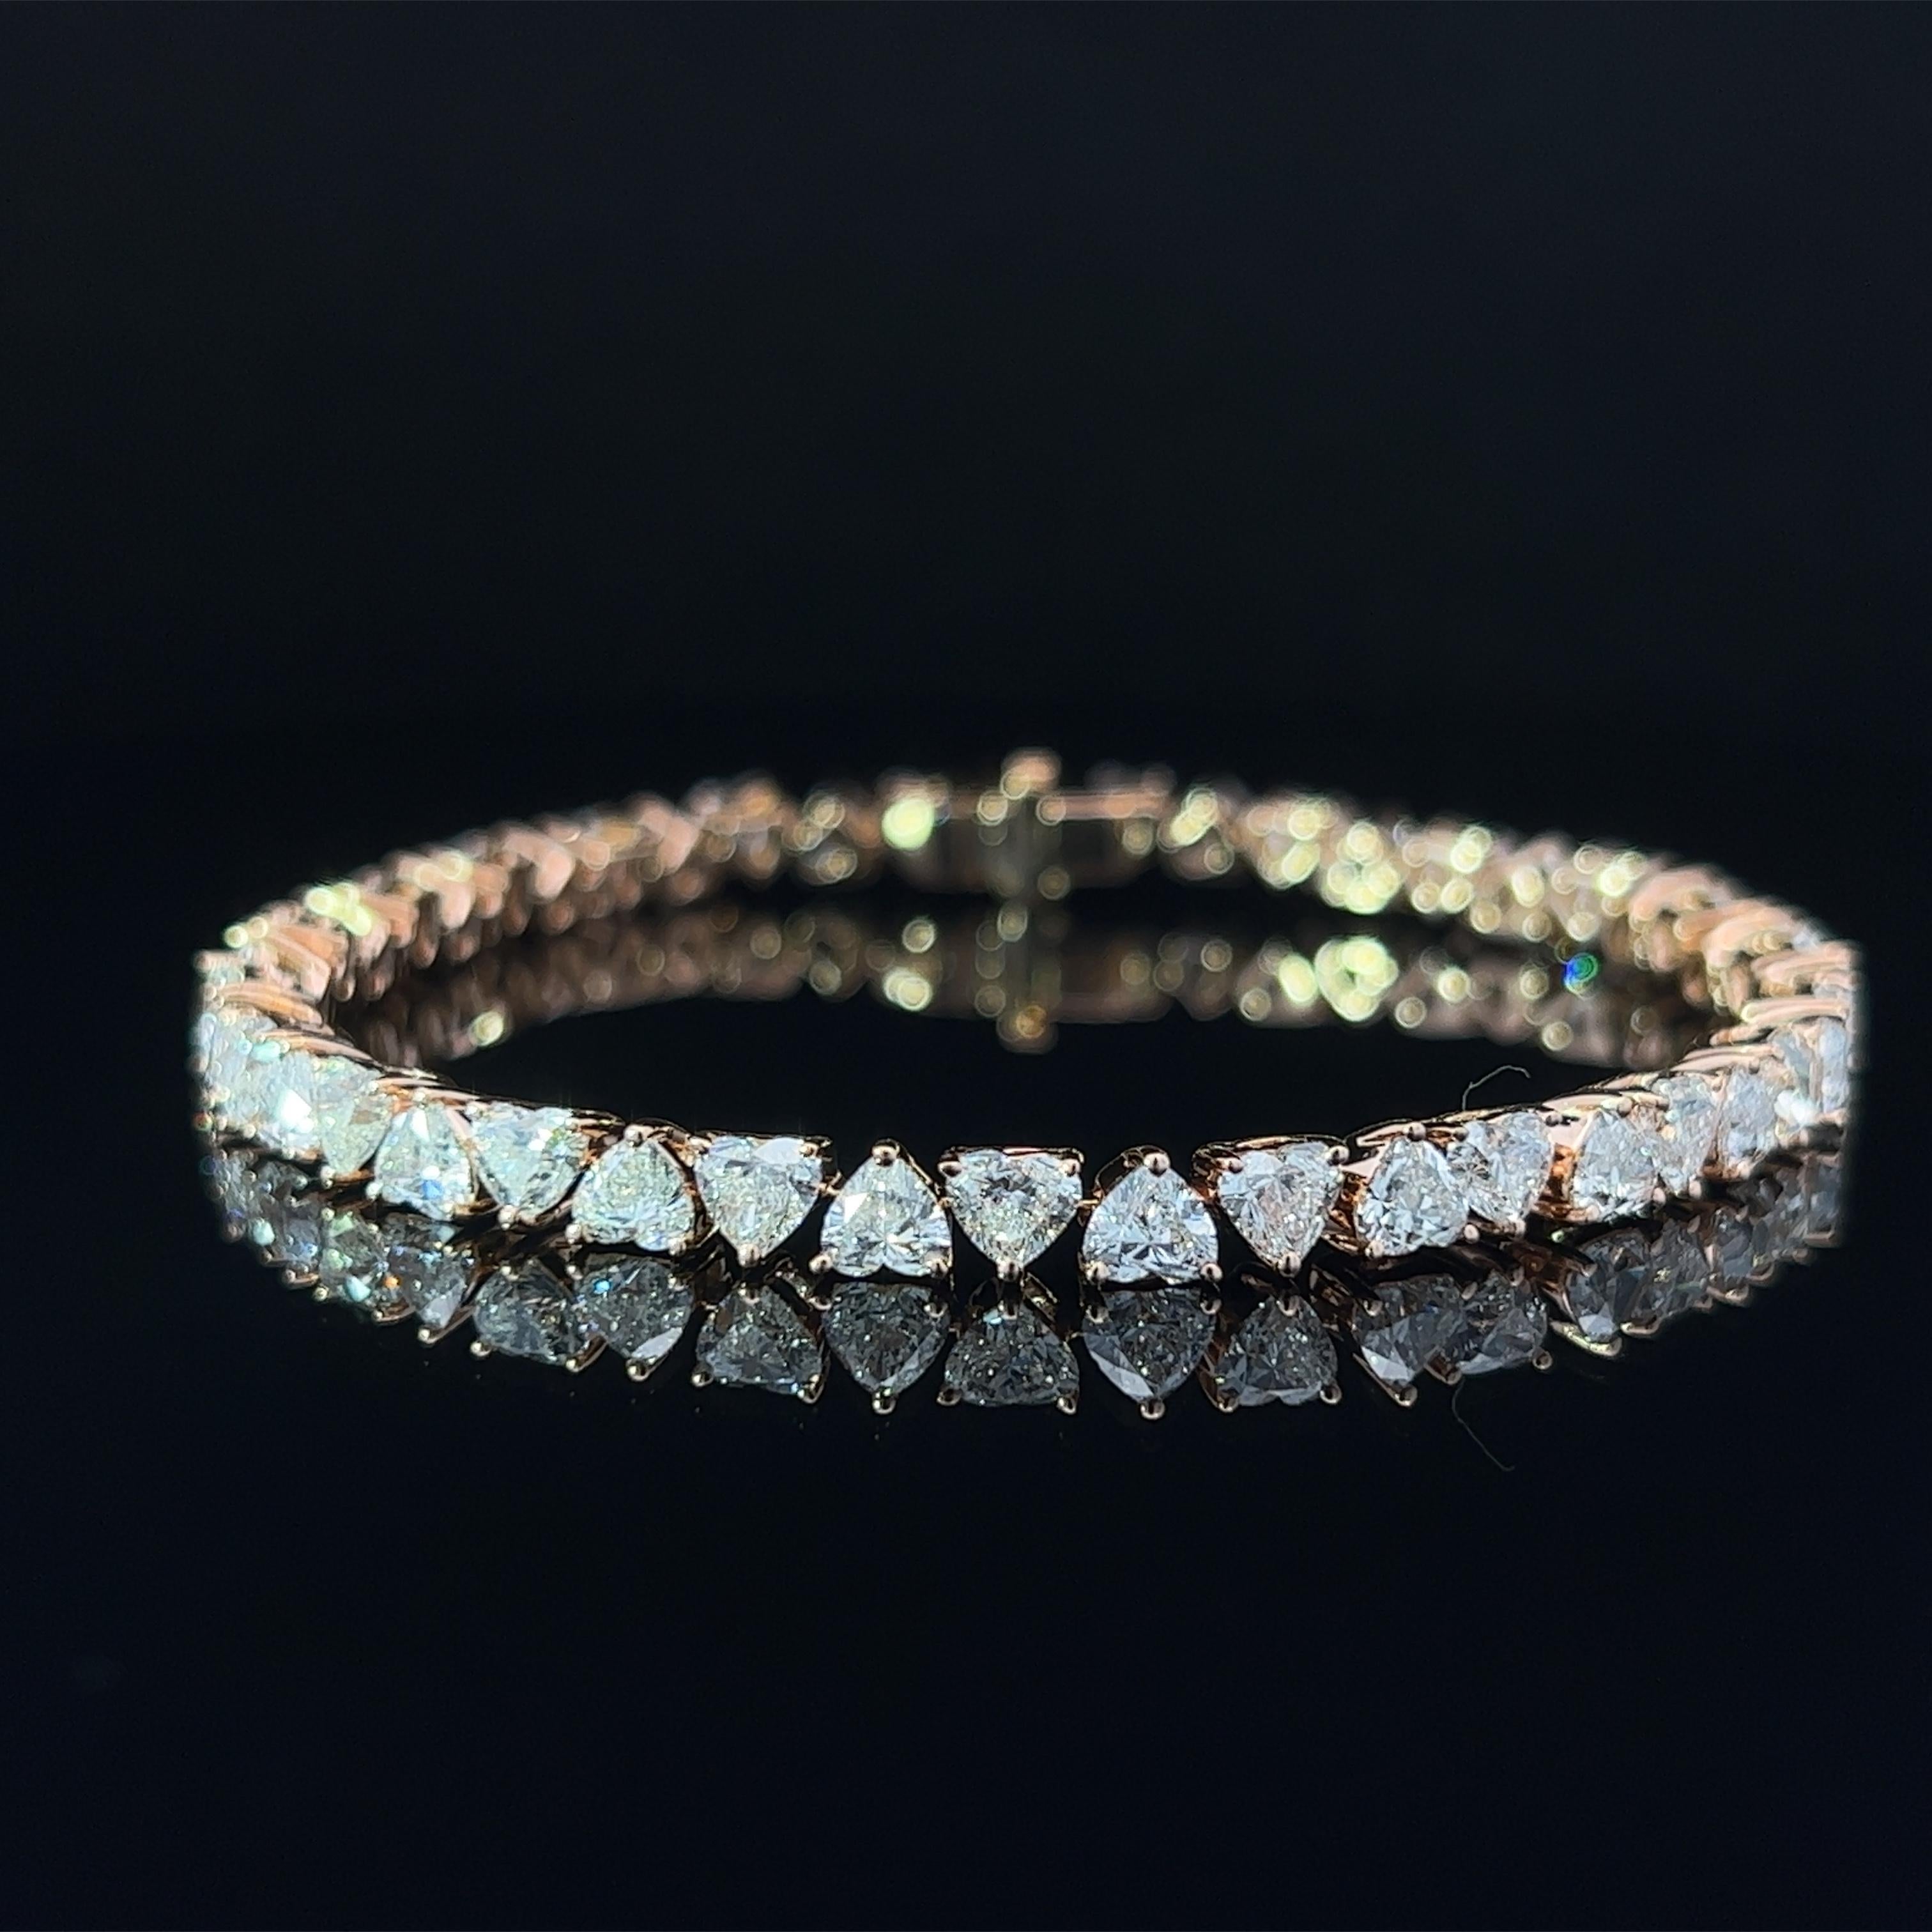 Diamond Shape: Heart 
Total Diamond Weight: 11.08ct
Individual Diamond Weight: .25ct
Color/Clarity: GH VVS  
Metal: 18K Rose Gold  
Metal Weight: 13.4g 

Key Features:

Heart-Shaped Reversed Diamonds: The centerpiece of this bracelet features a